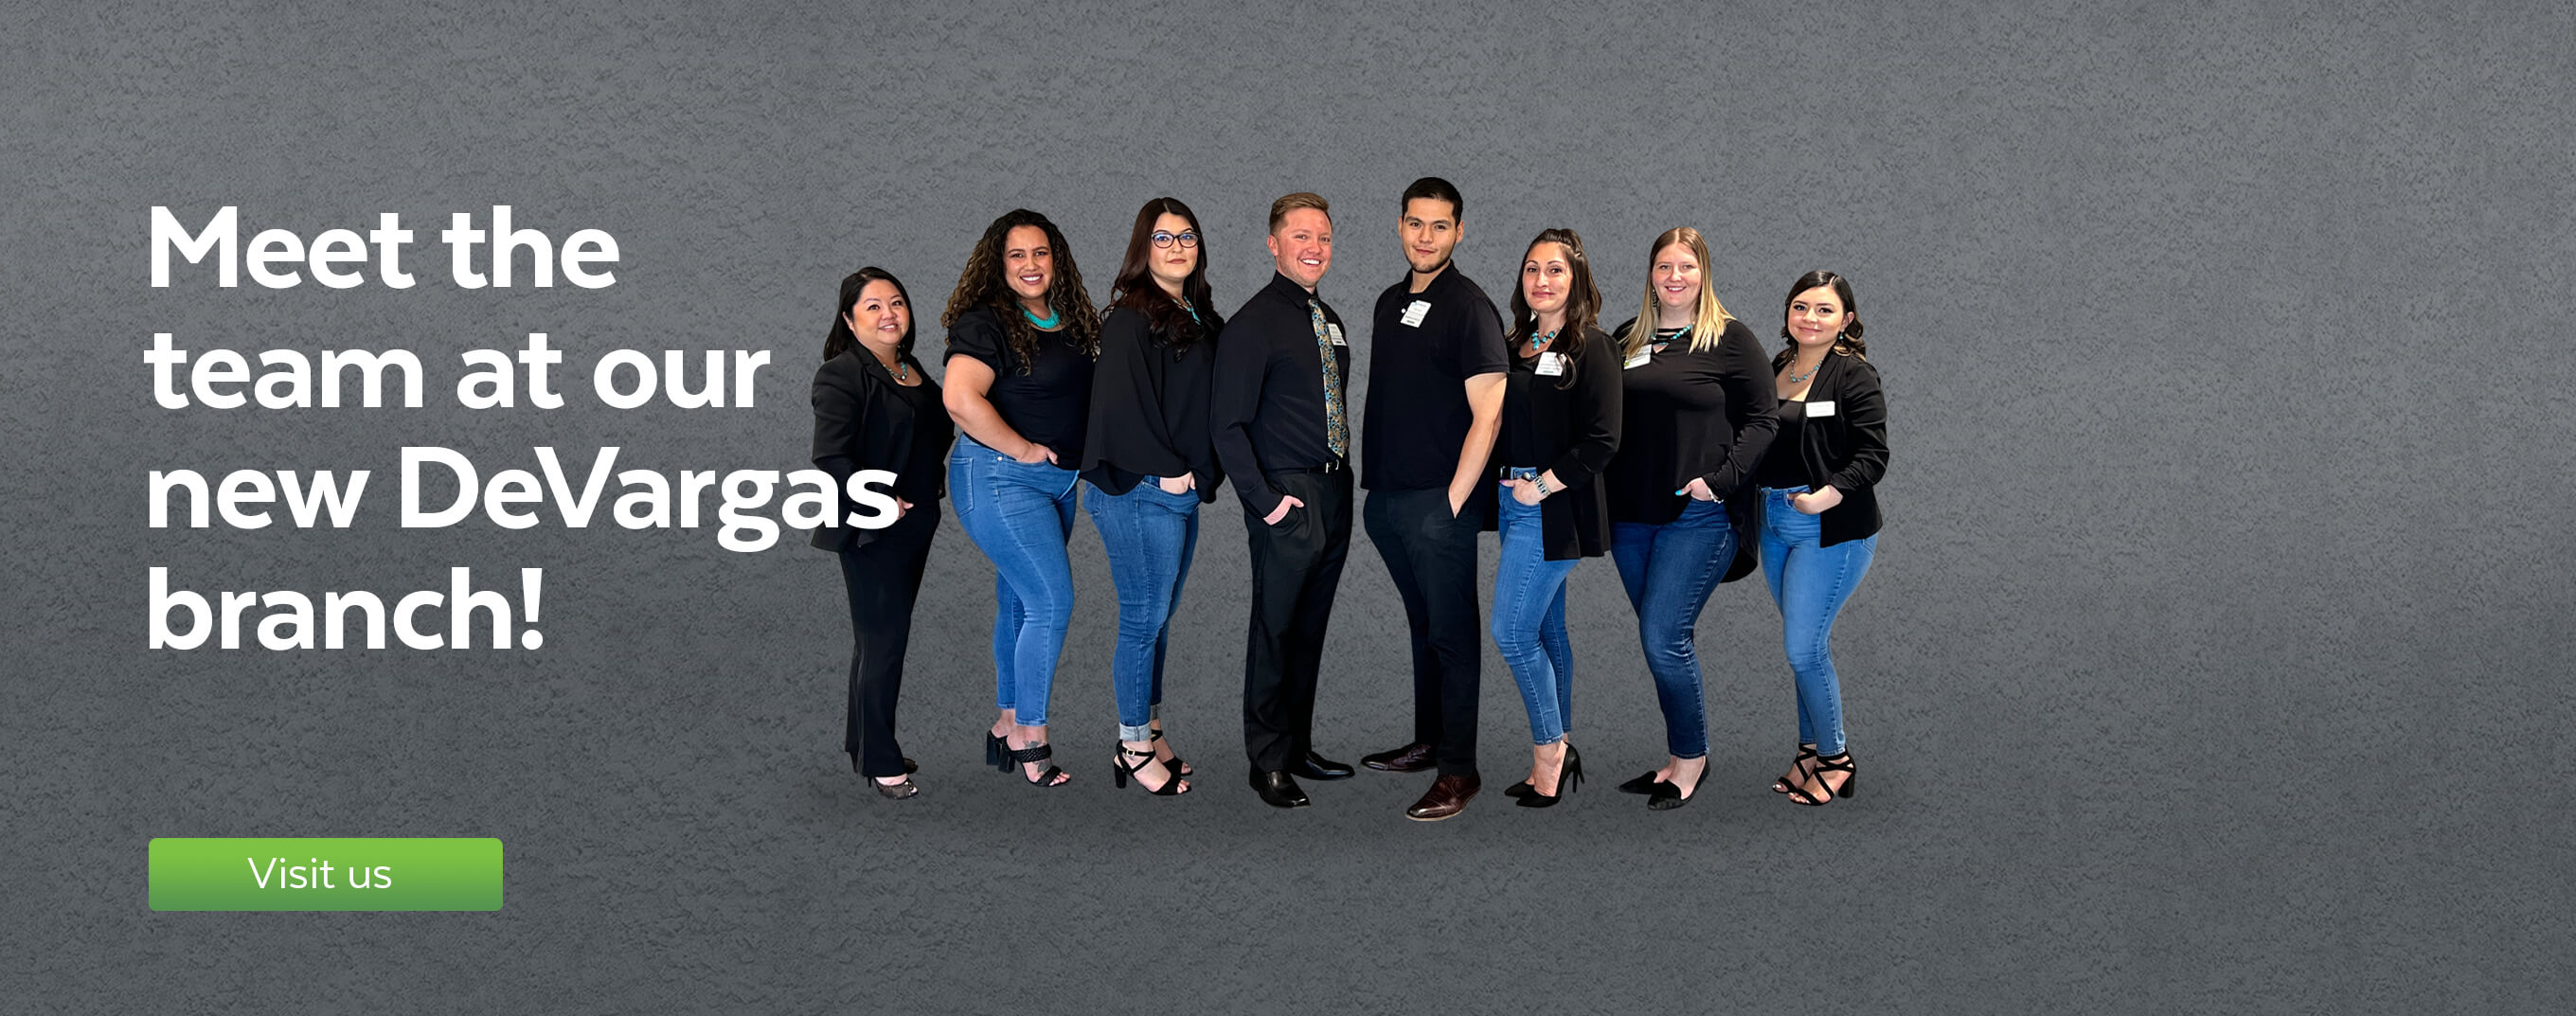 Meet the team at our new DeVargas branch!